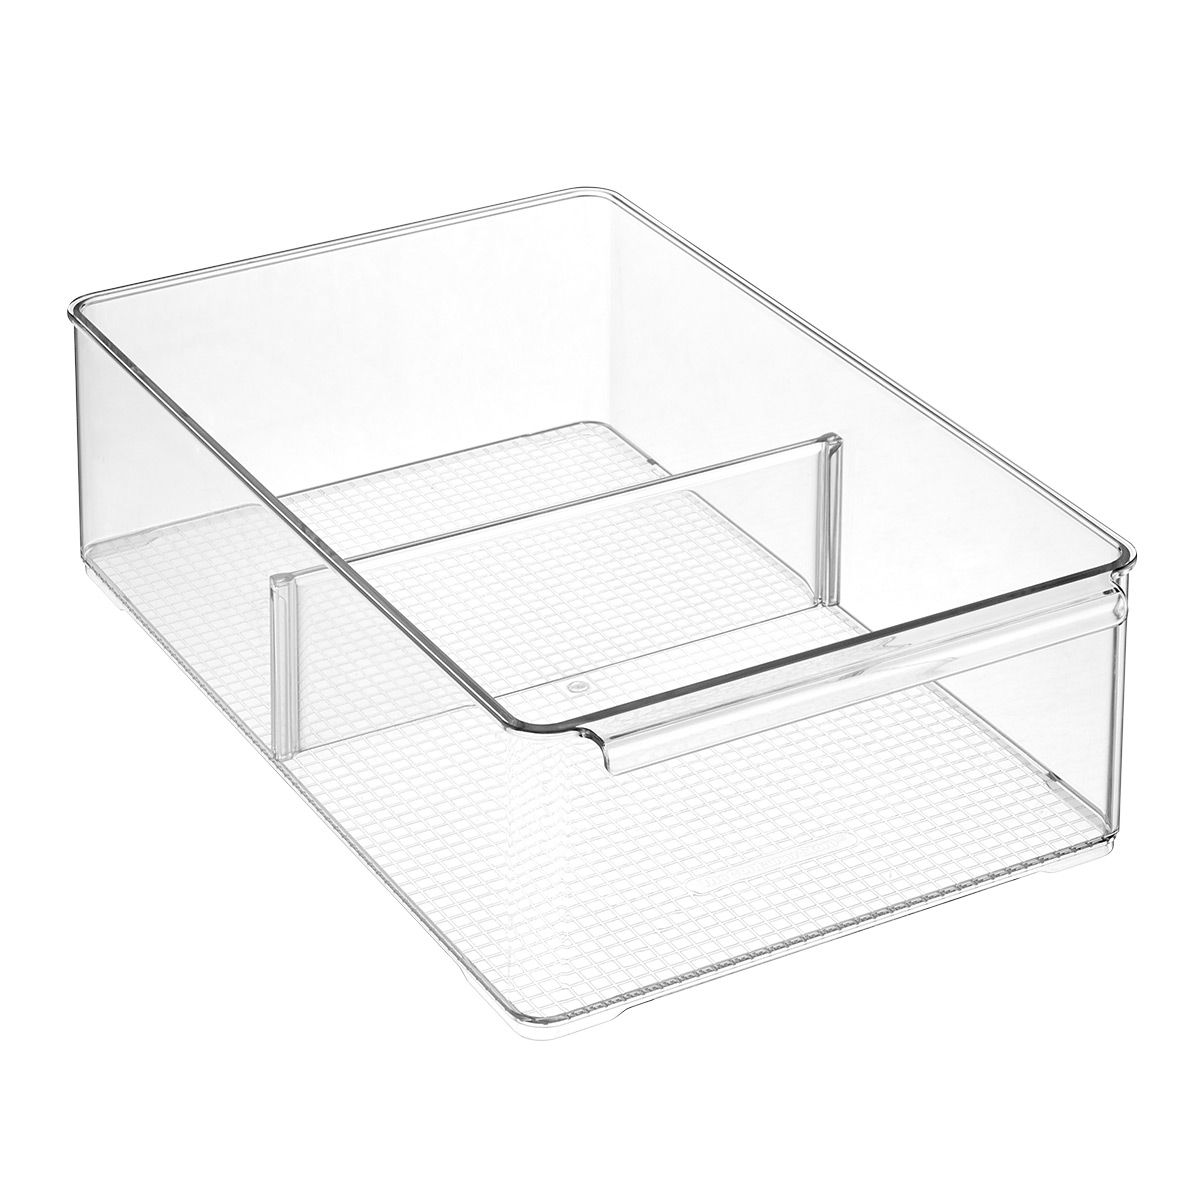 Everything Organizer Wide Fridge Bin w/ Divider ClearSKU:100900895.02 Reviews | The Container Store